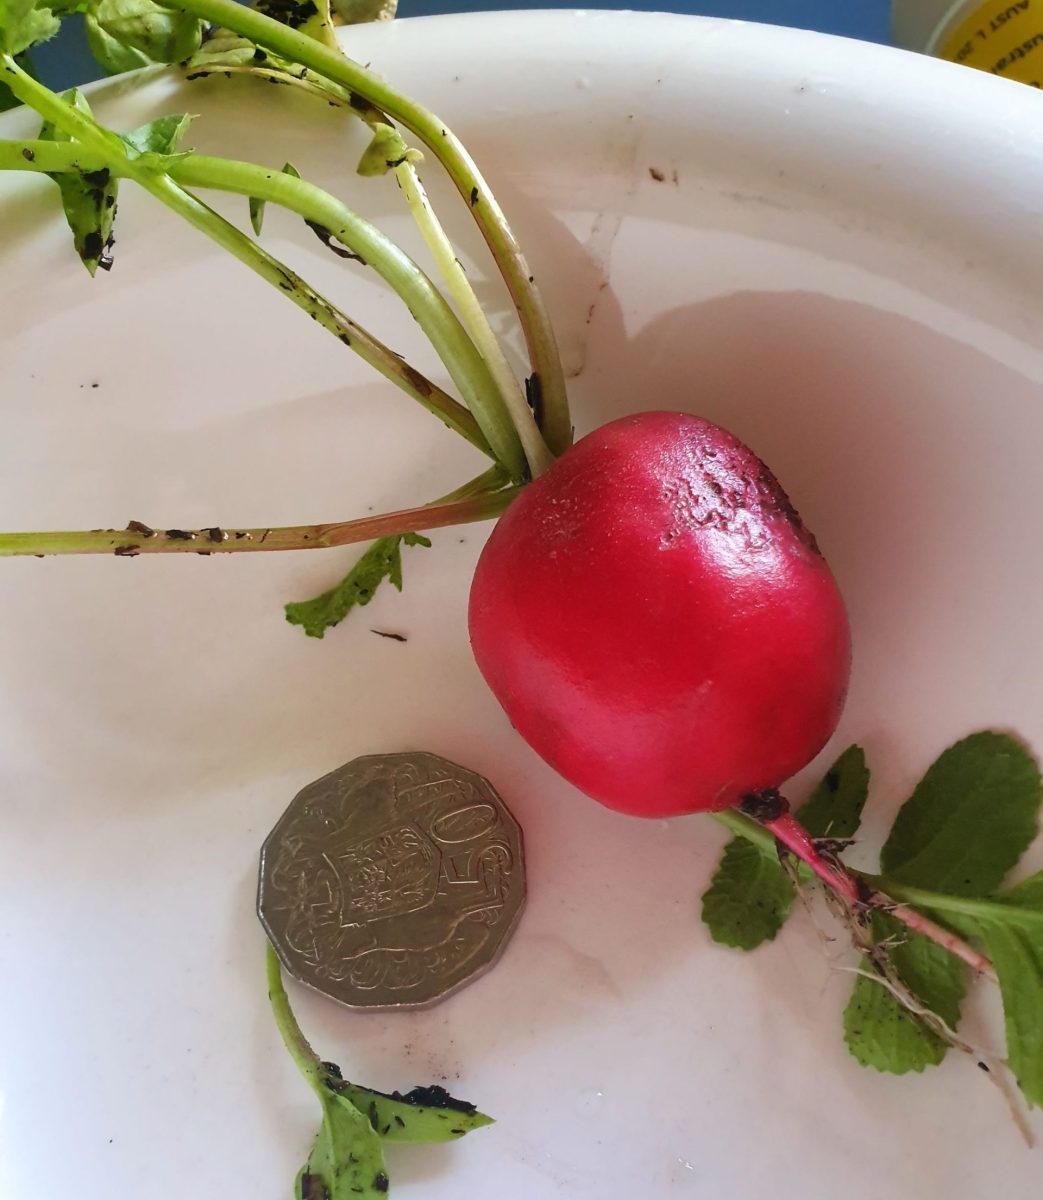 Radish on a plate next to a 50-cent piece